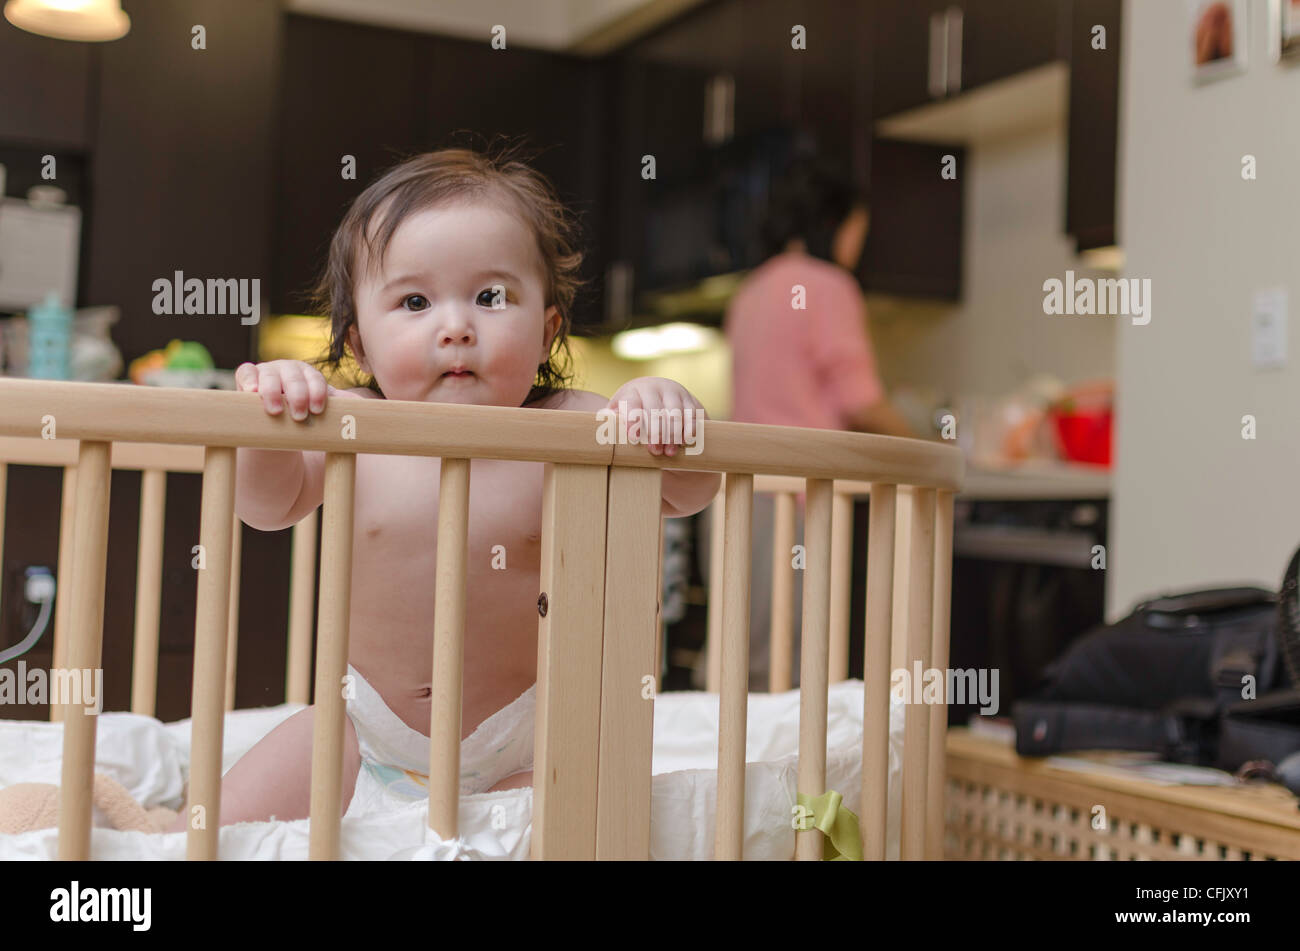 Cute baby girl in a crib. Mixed ethnicity (Asian, Caucasian) Stock Photo